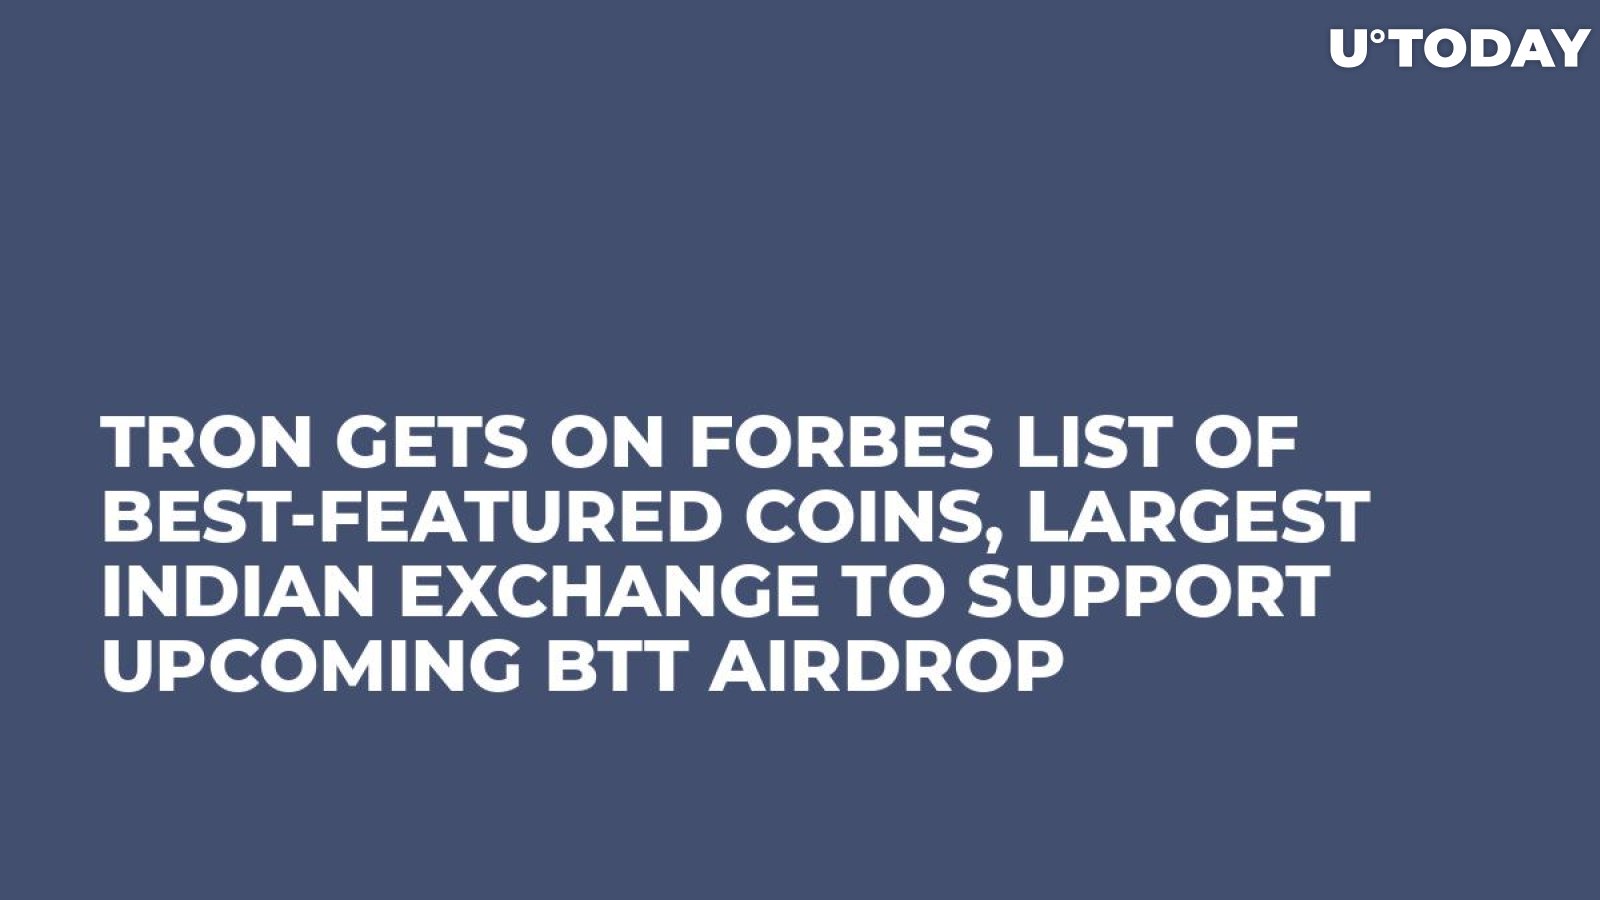 Tron Gets On Forbes List of Best-Featured Coins, Largest Indian Exchange to Support Upcoming BTT Airdrop